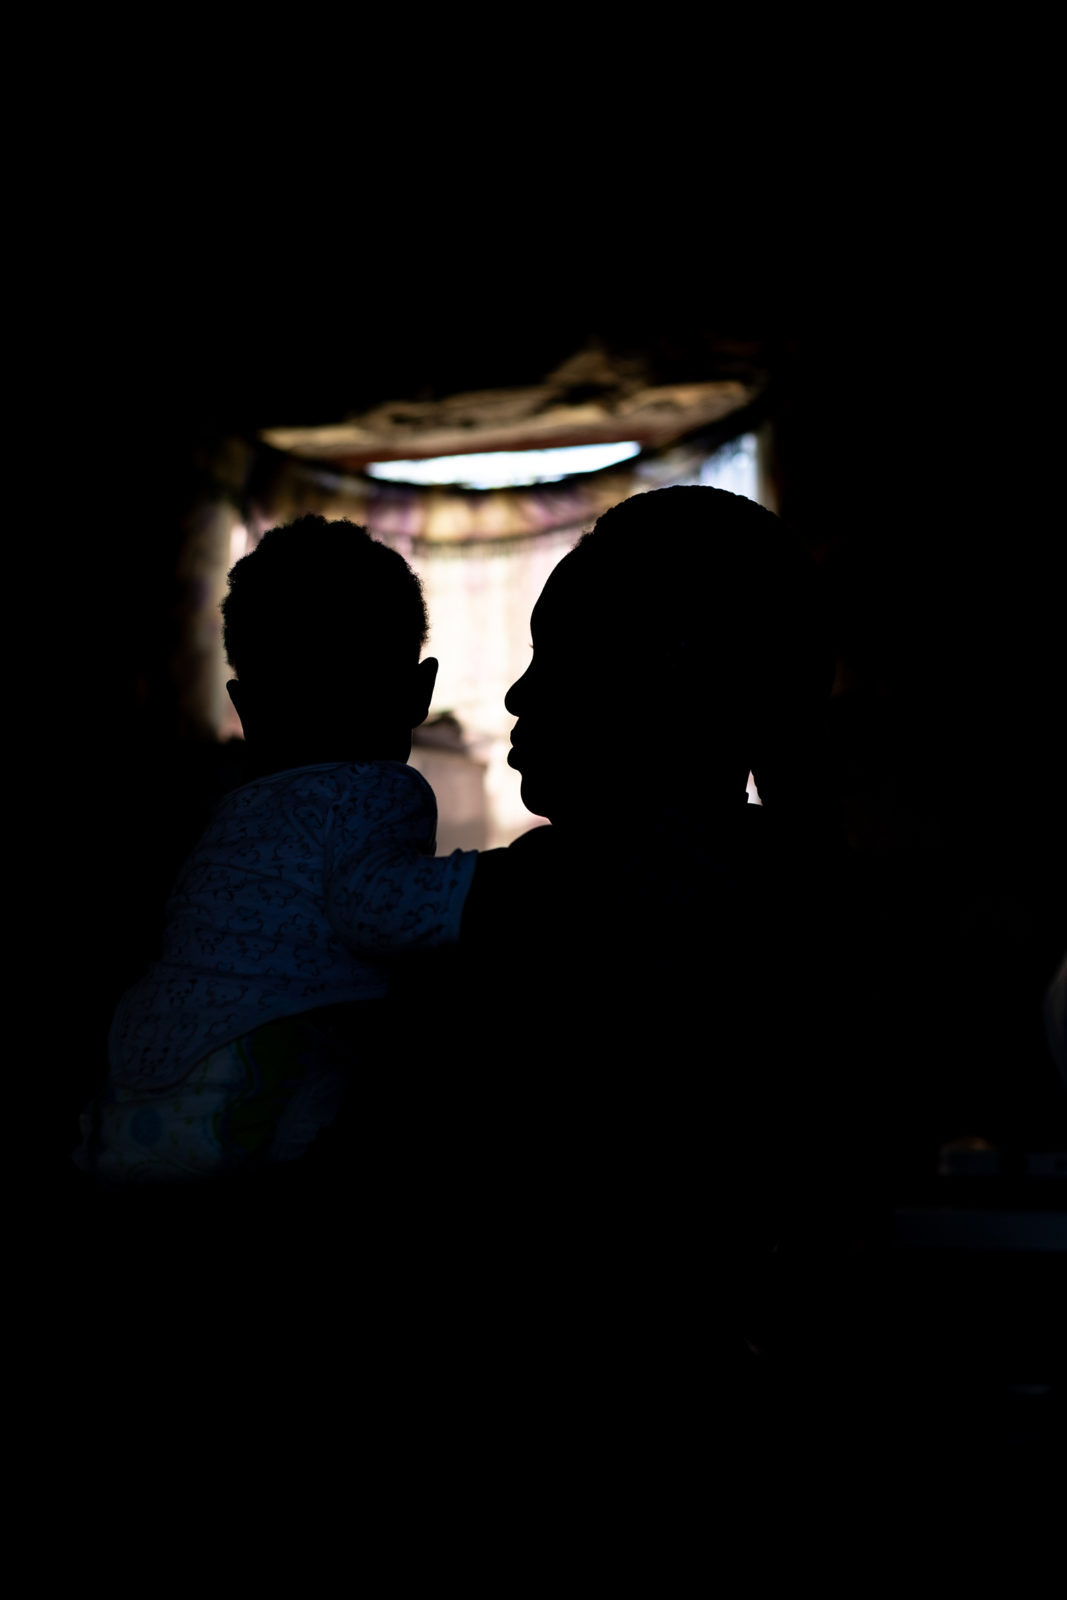 A photo of a woman and baby's sillouhette